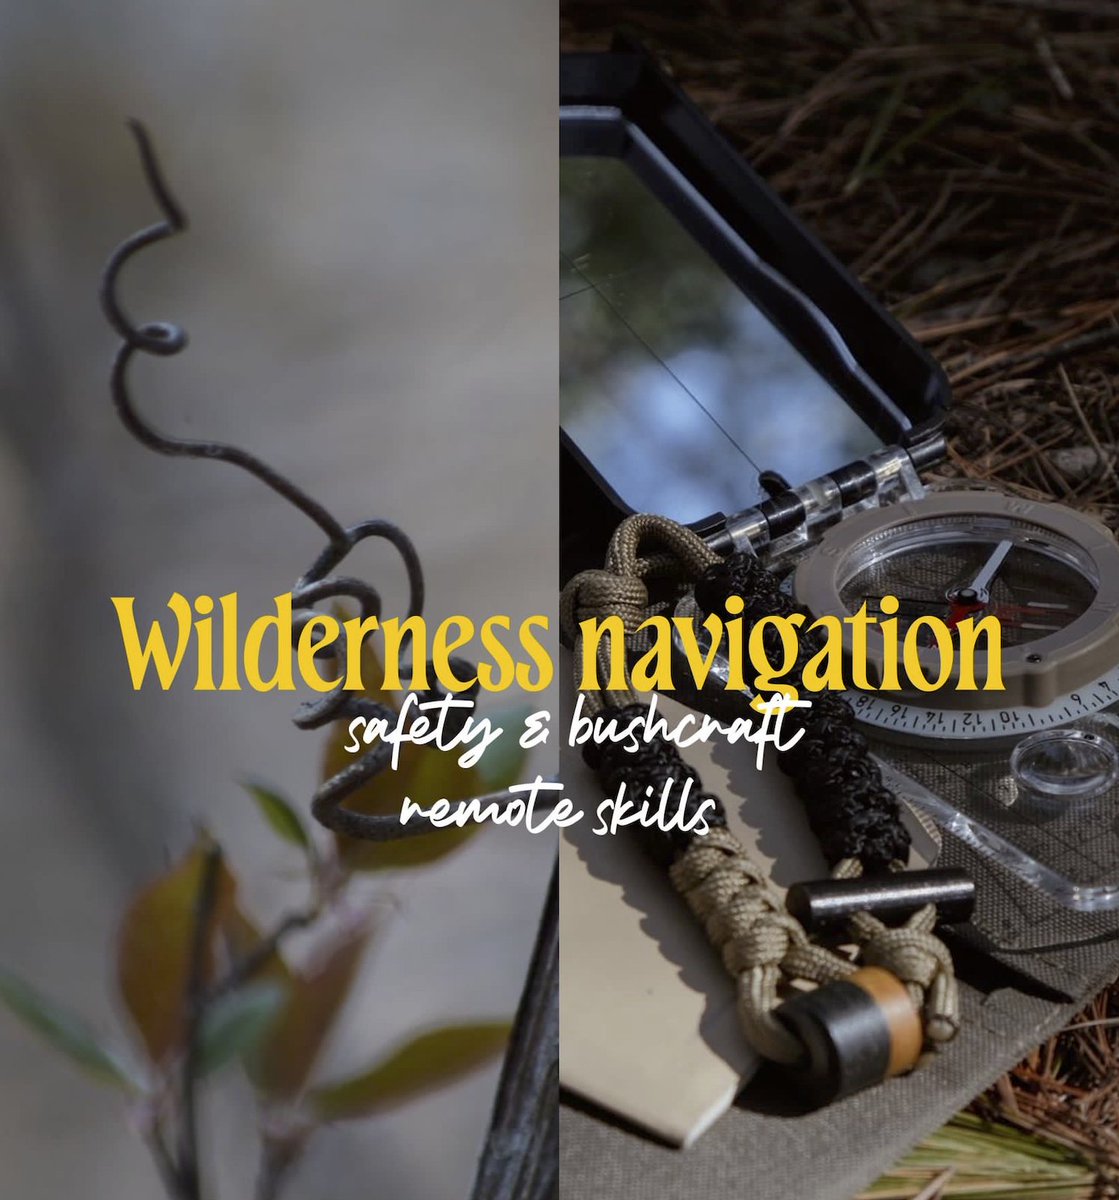 UPCOMING WORKSHOP 🗺️🌲 Learn essential skills for outdoor adventures including how to navigate with a map and compass, start a fire and build a shelter! 2 day workshop at the Station; Jul 15-16 or Aug 12-13 Email bushcraftology@gmail.com for details/reg